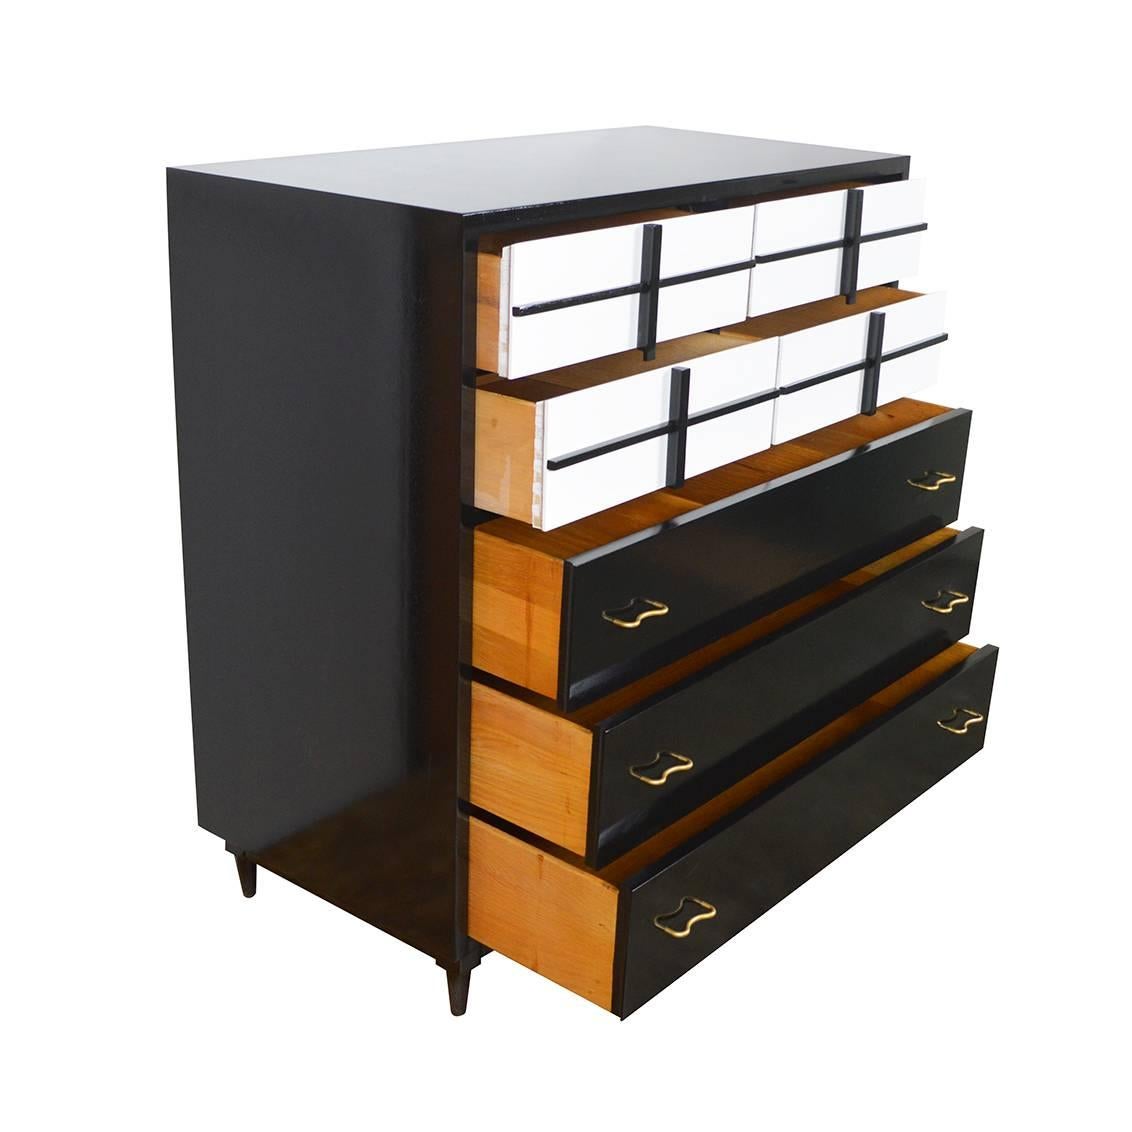 Vintage American of Martinsville tall Midcentury dresser newly lacquered in black and white. The top has four small drawers and bottom has 3 large drawers.